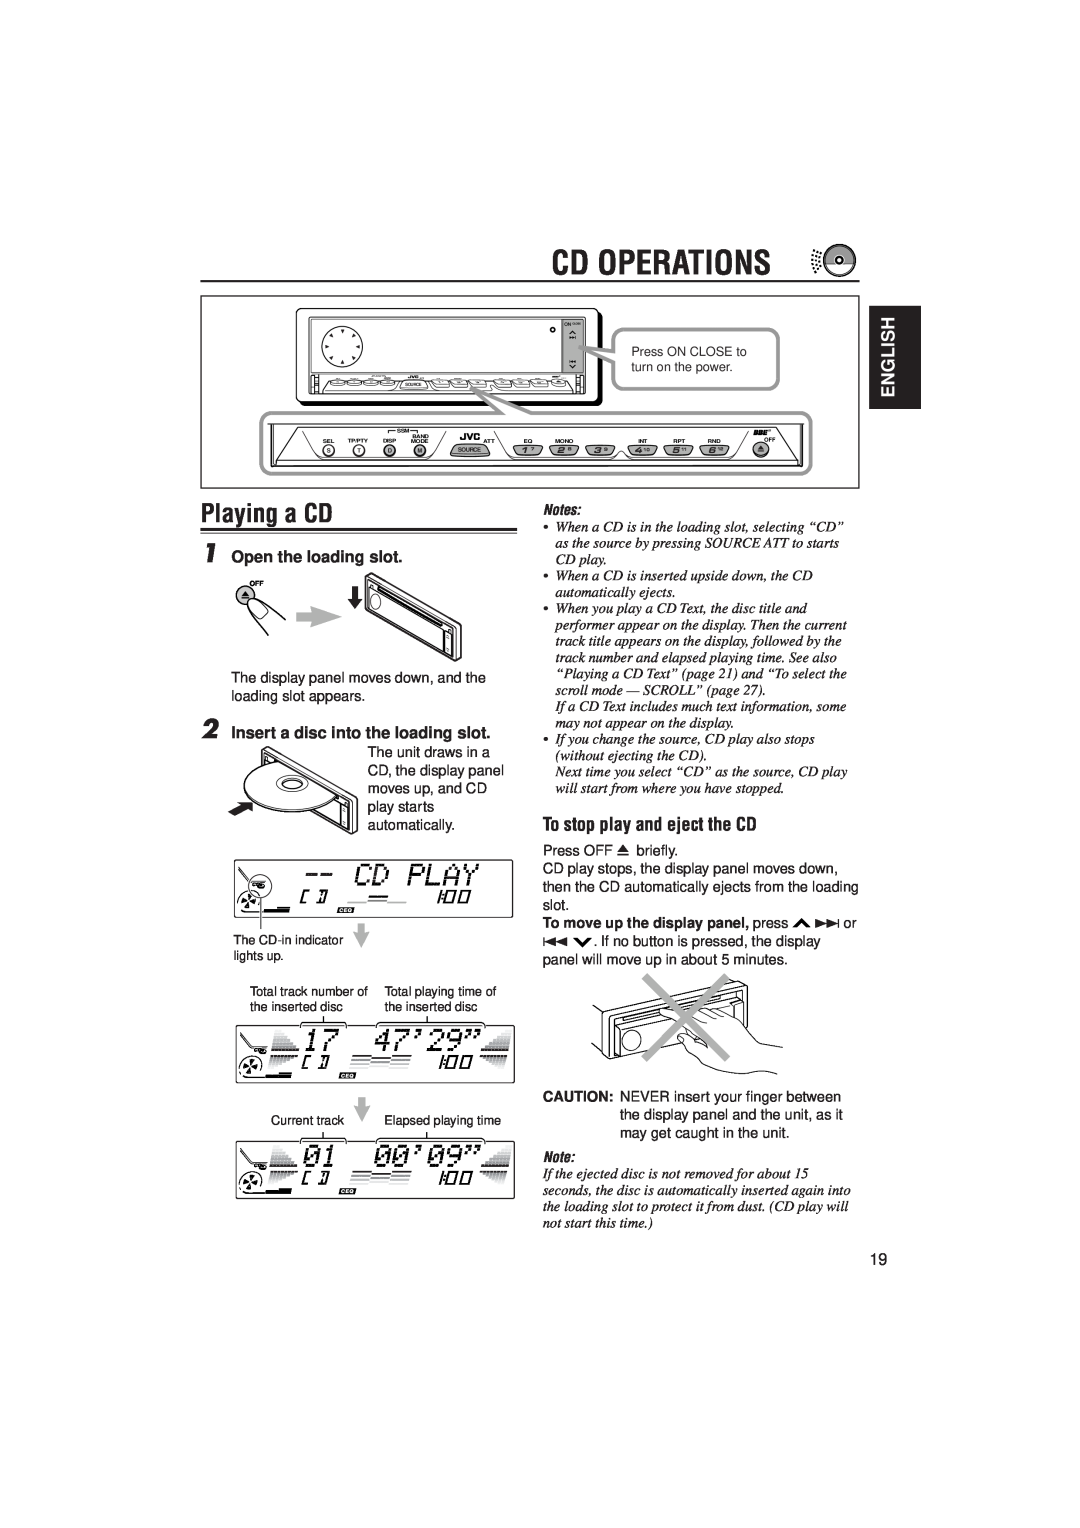 JVC PIM171200 manual Cd Operations, Playing a CD, English, To stop play and eject the CD, Open the loading slot 